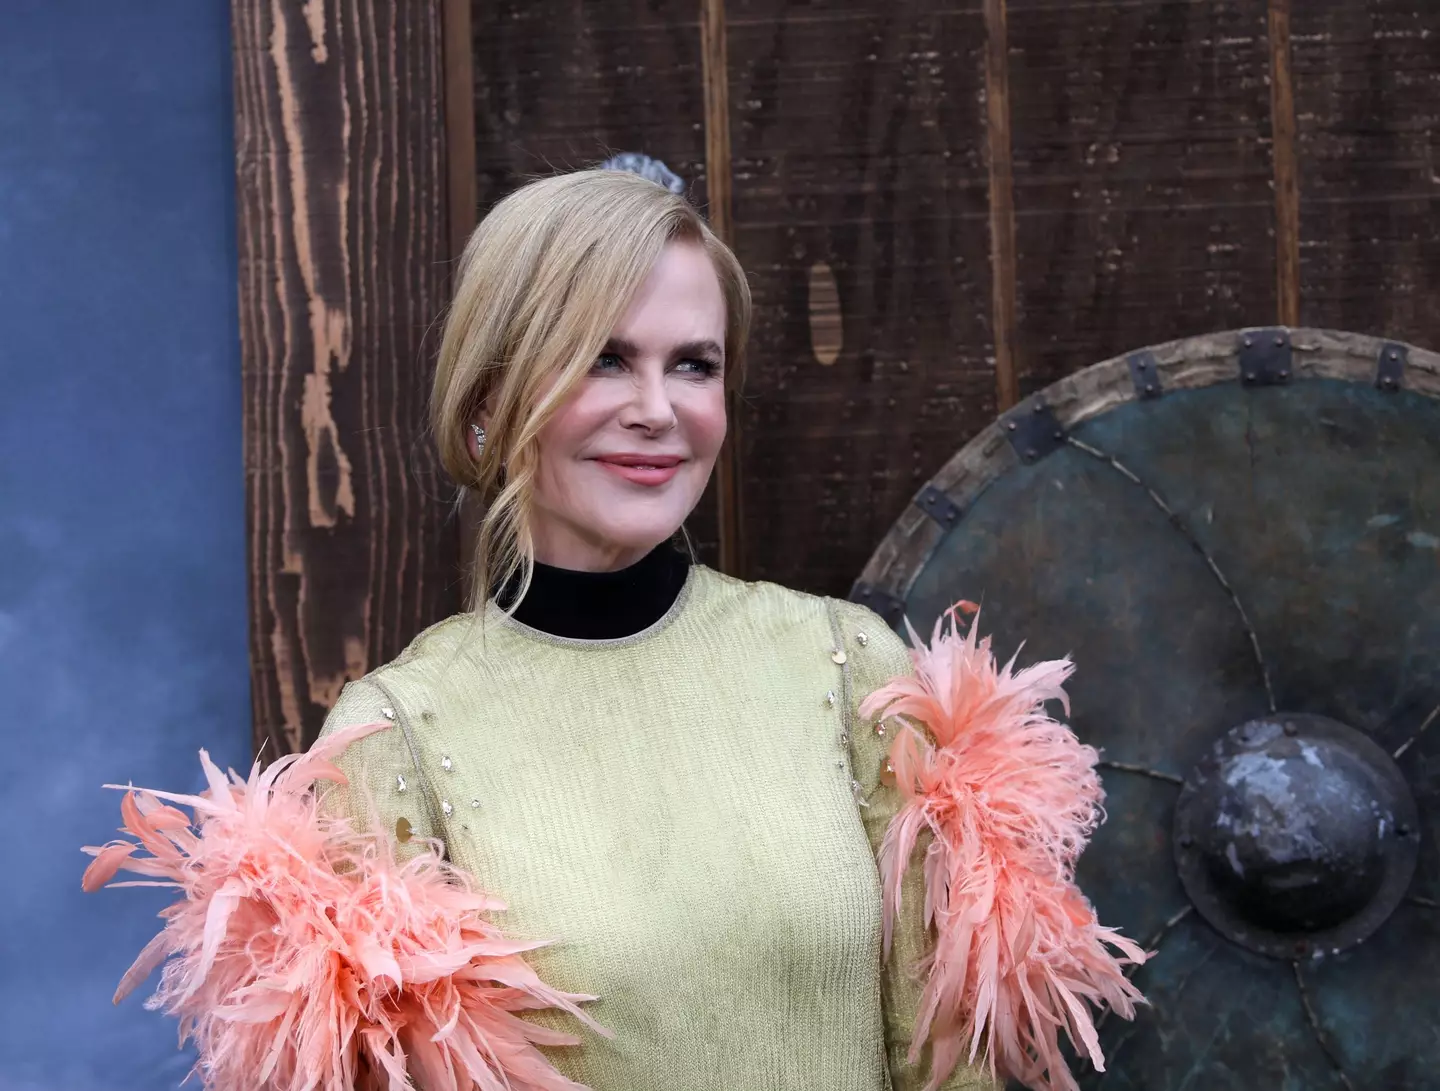 Nicole Kidman said she was 'begging' to wear the outfit featured on the cover.